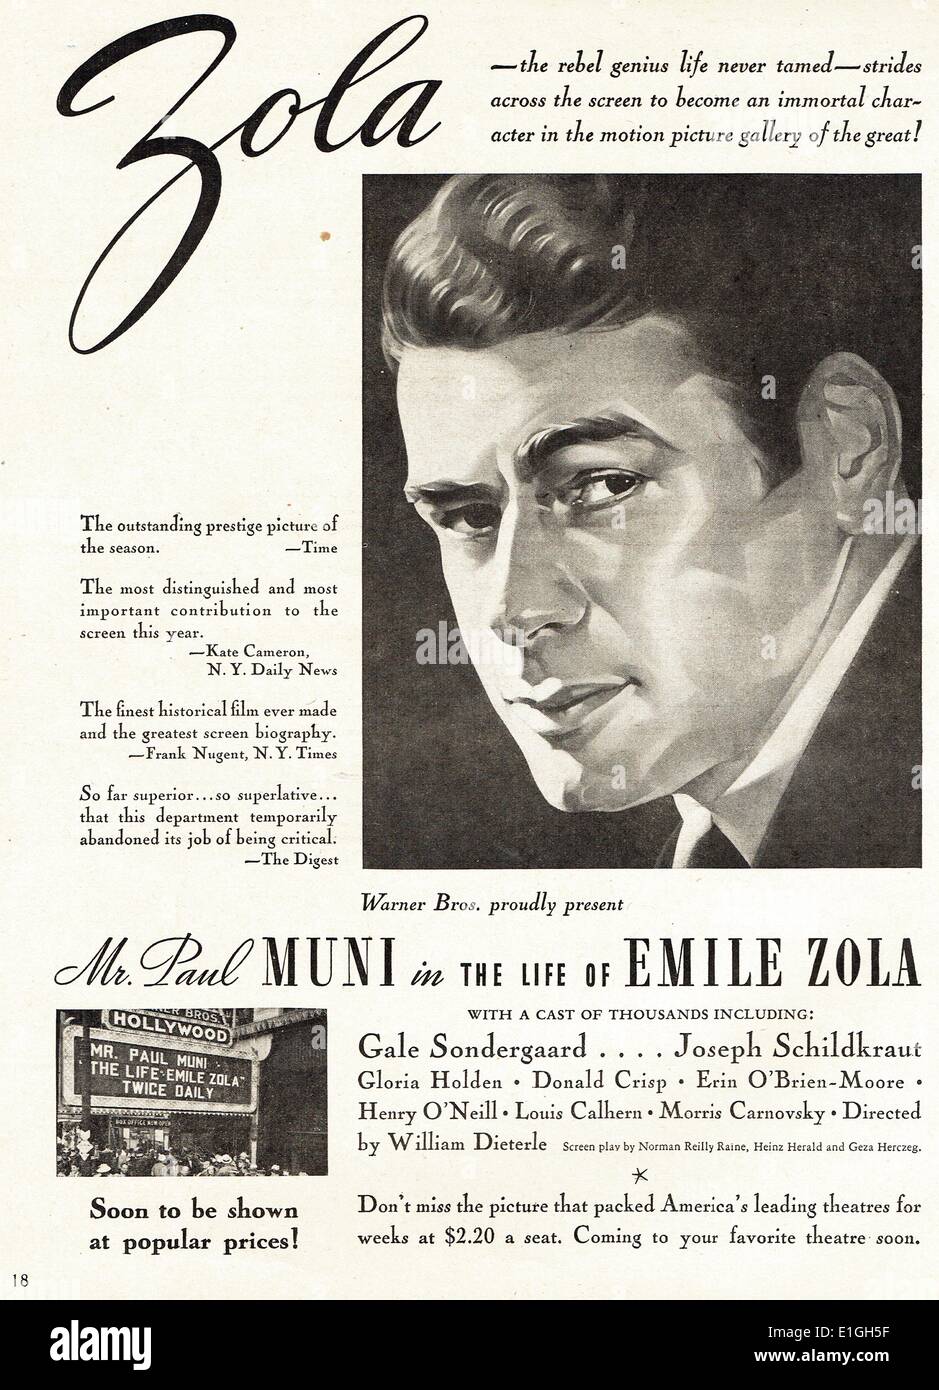 The Life of Emile Zola a 1937 American biographical film starring Paul Mundi. Stock Photo